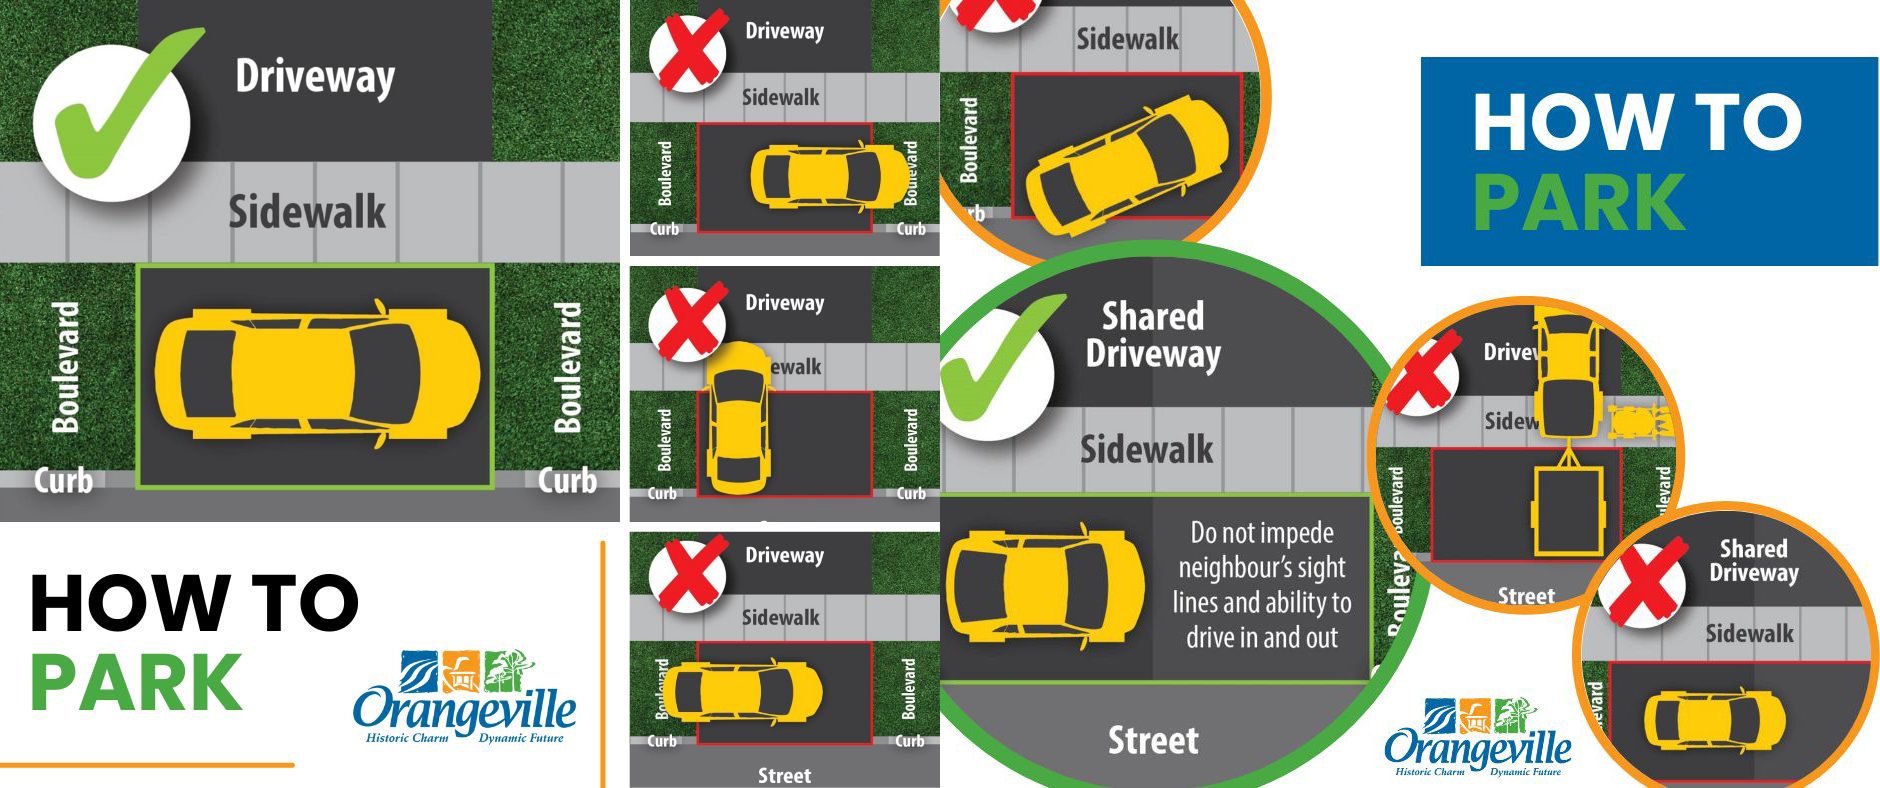 A graphic depicting the correct ways to park on the lower portion of your driveway.